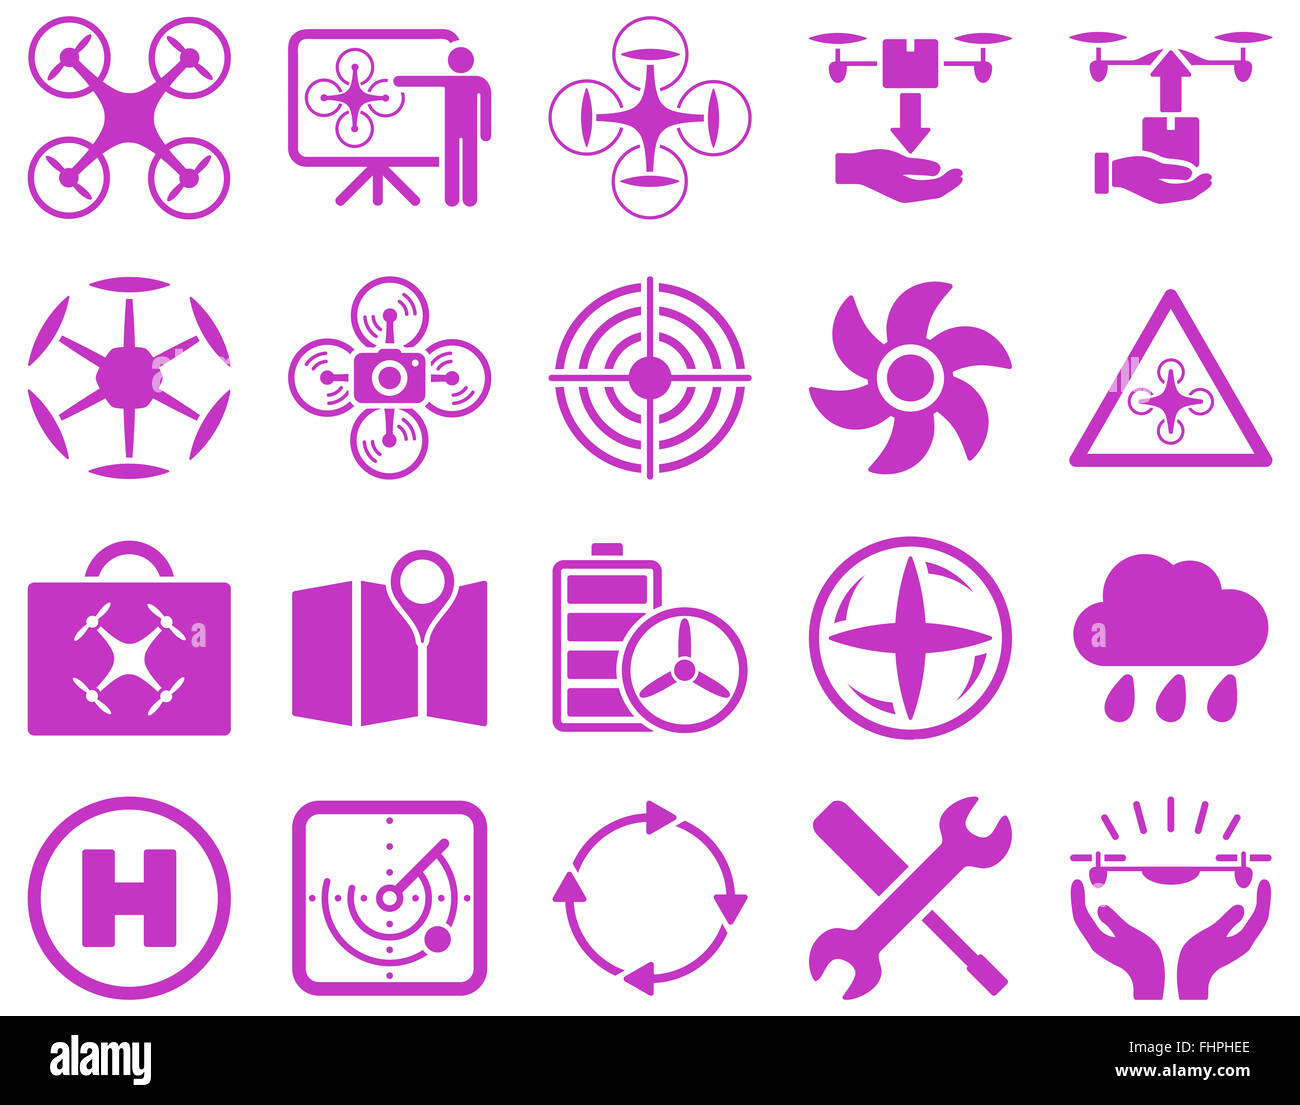 Air drone and quadcopter tool icons Stock Photo